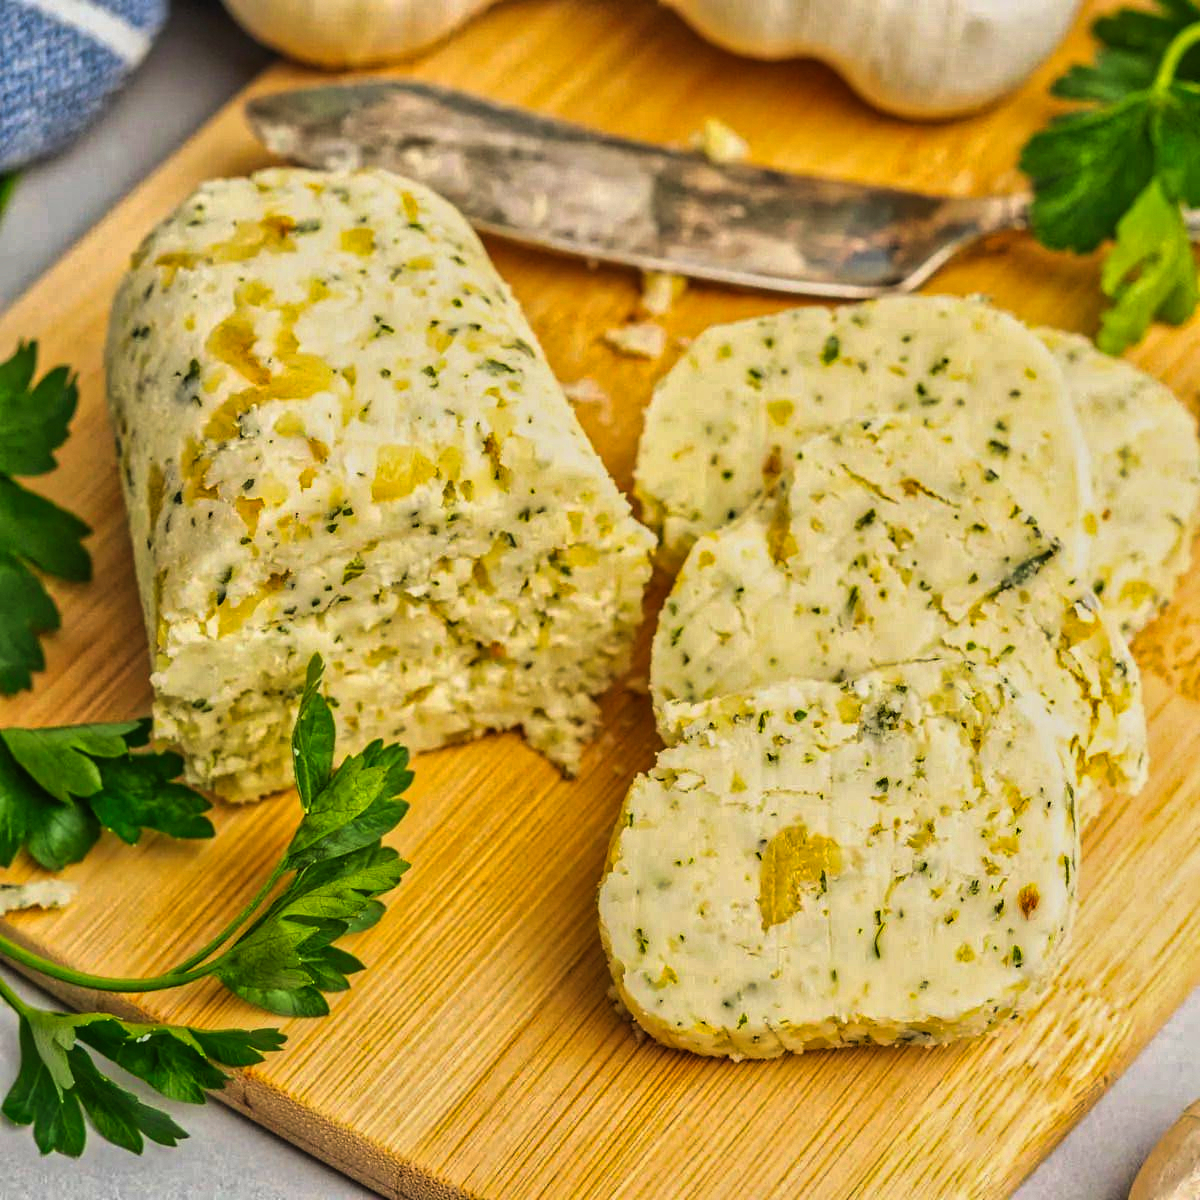 25. Roasted Garlic and Herb Compound Butter